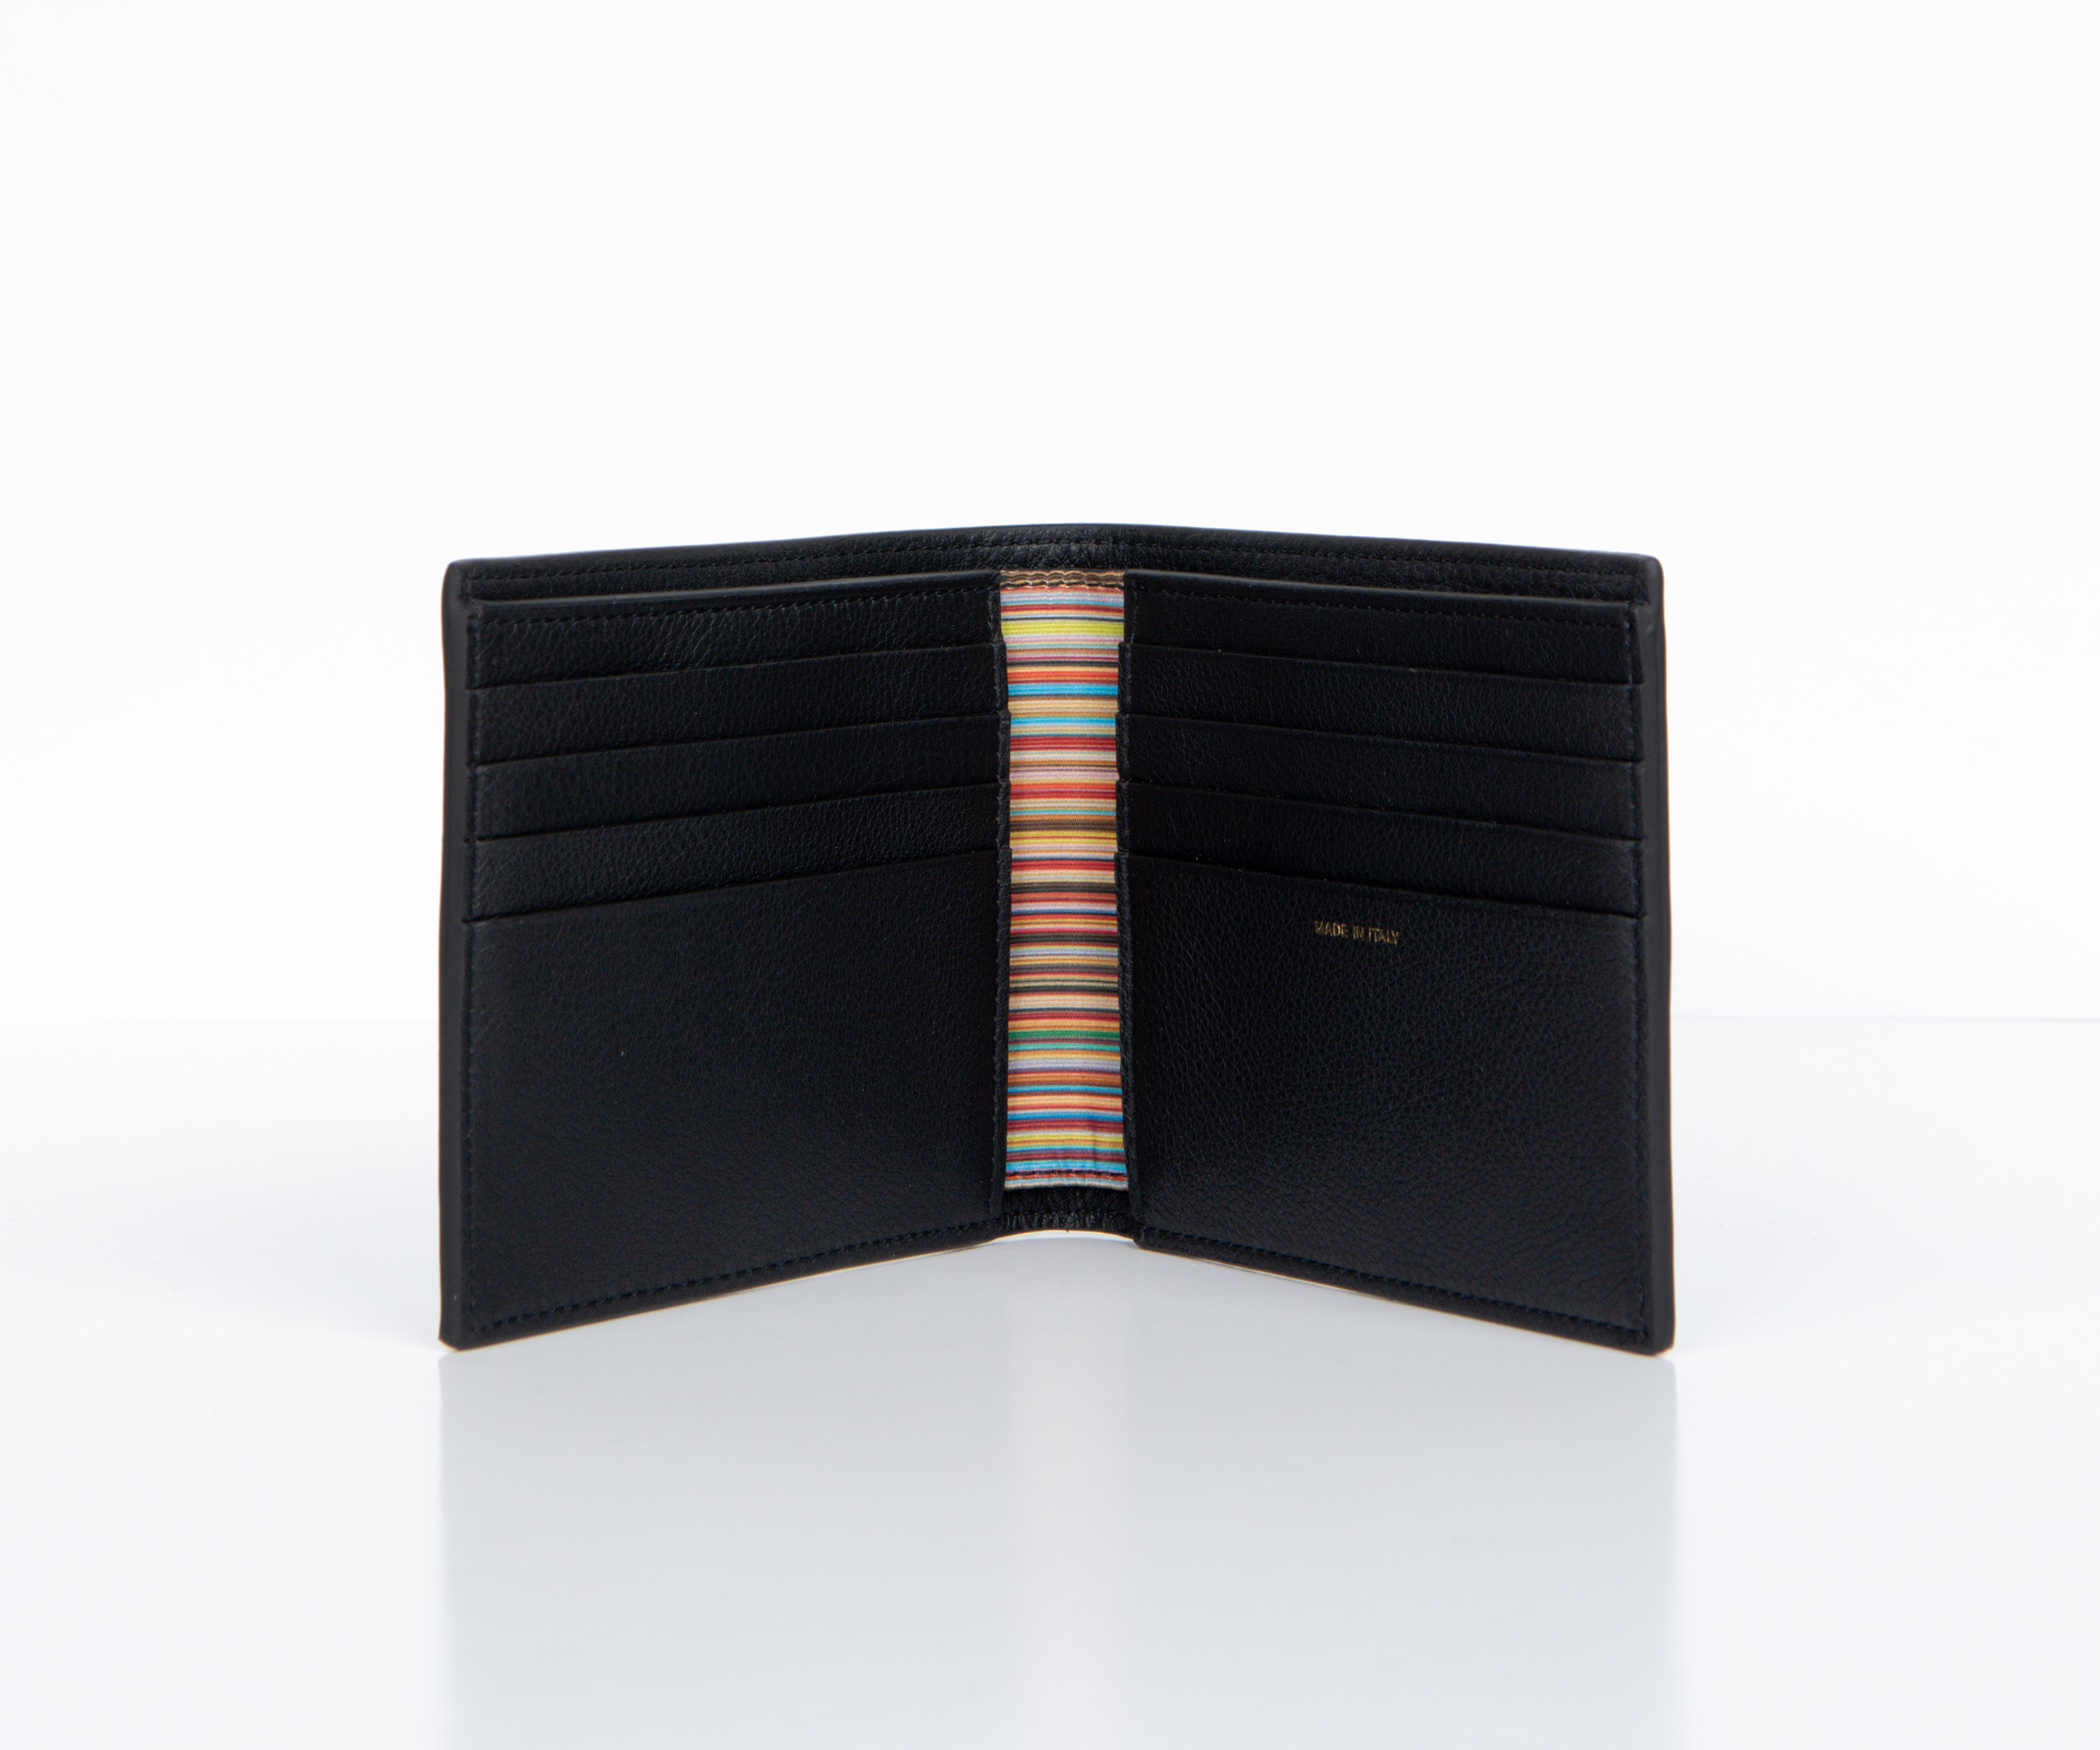 Paul Smith 'Leather' Billfold Wallet With Signature Stripe Black